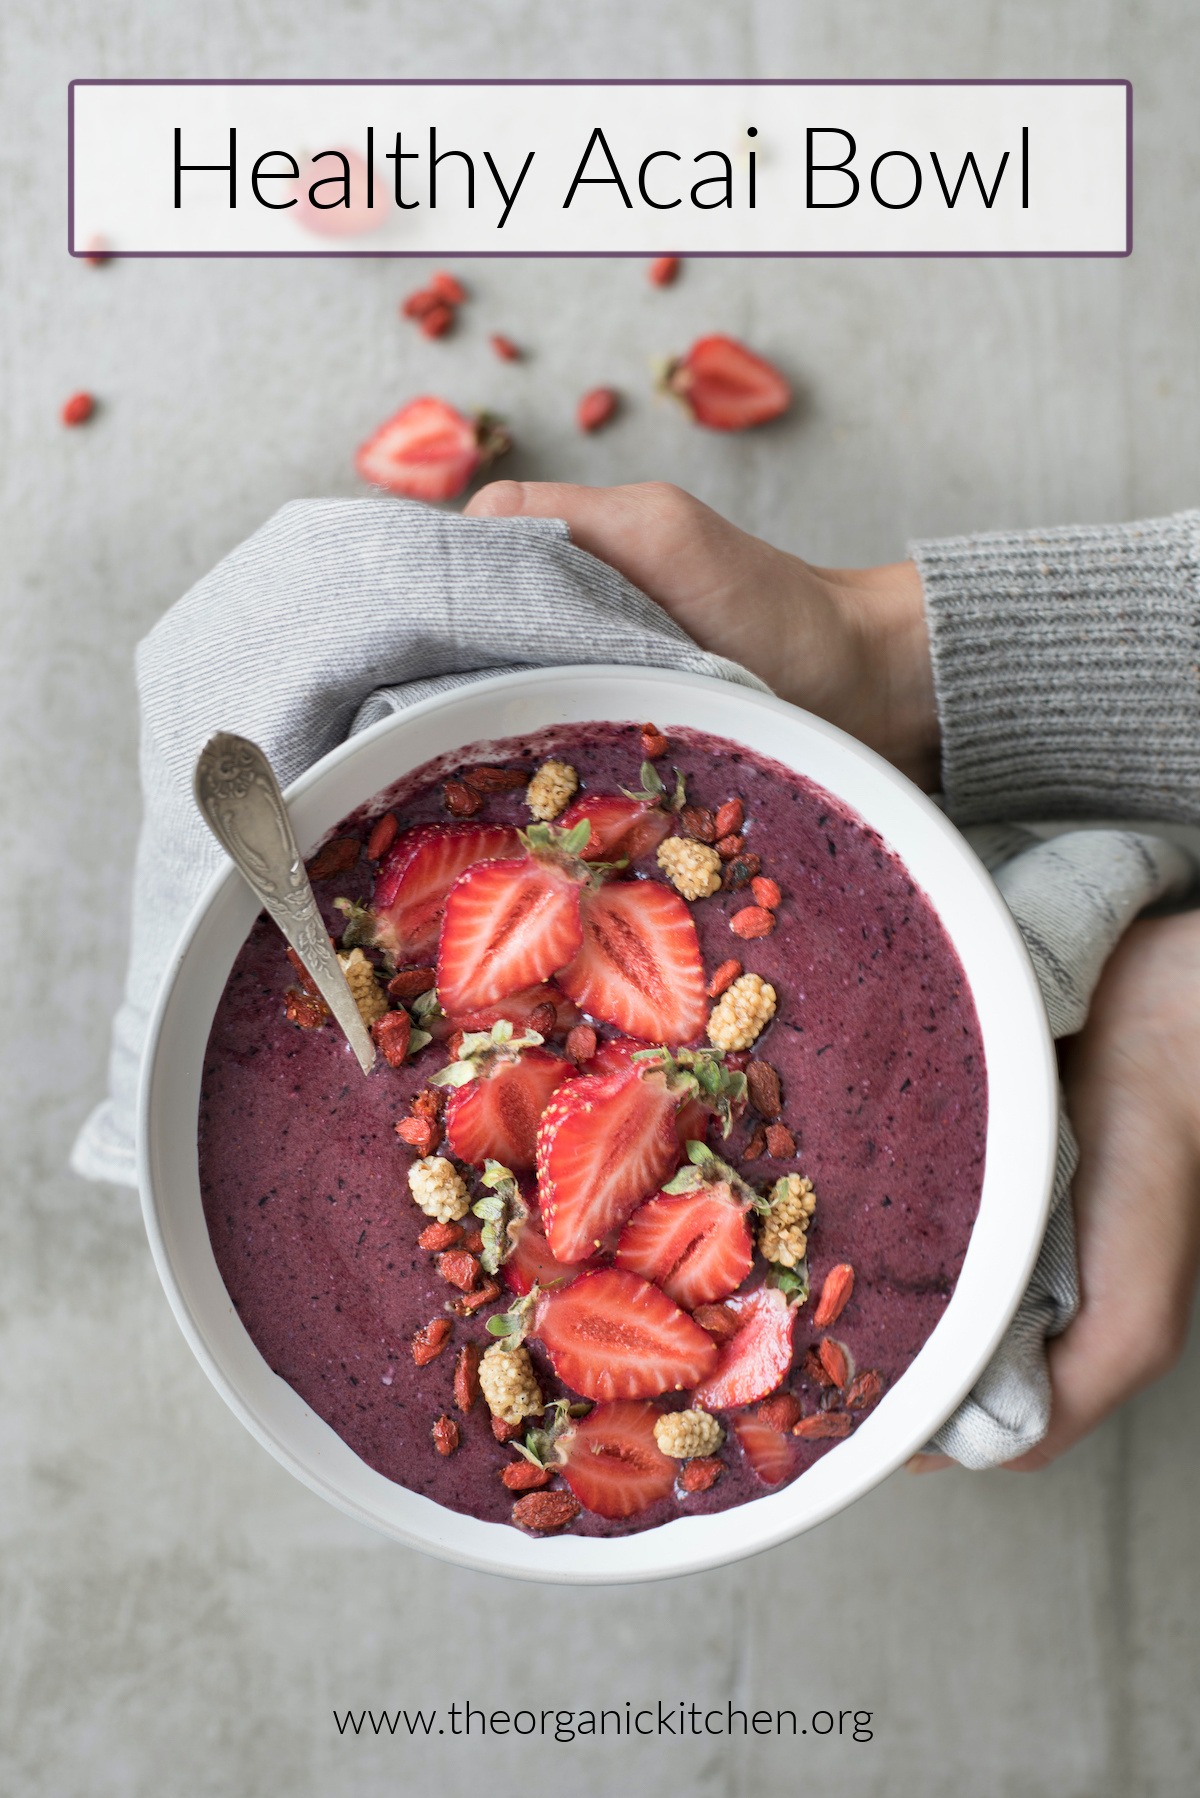 A woman's hands holding a Healthy Açaí Smoothie Bowl with cut strawberries on top